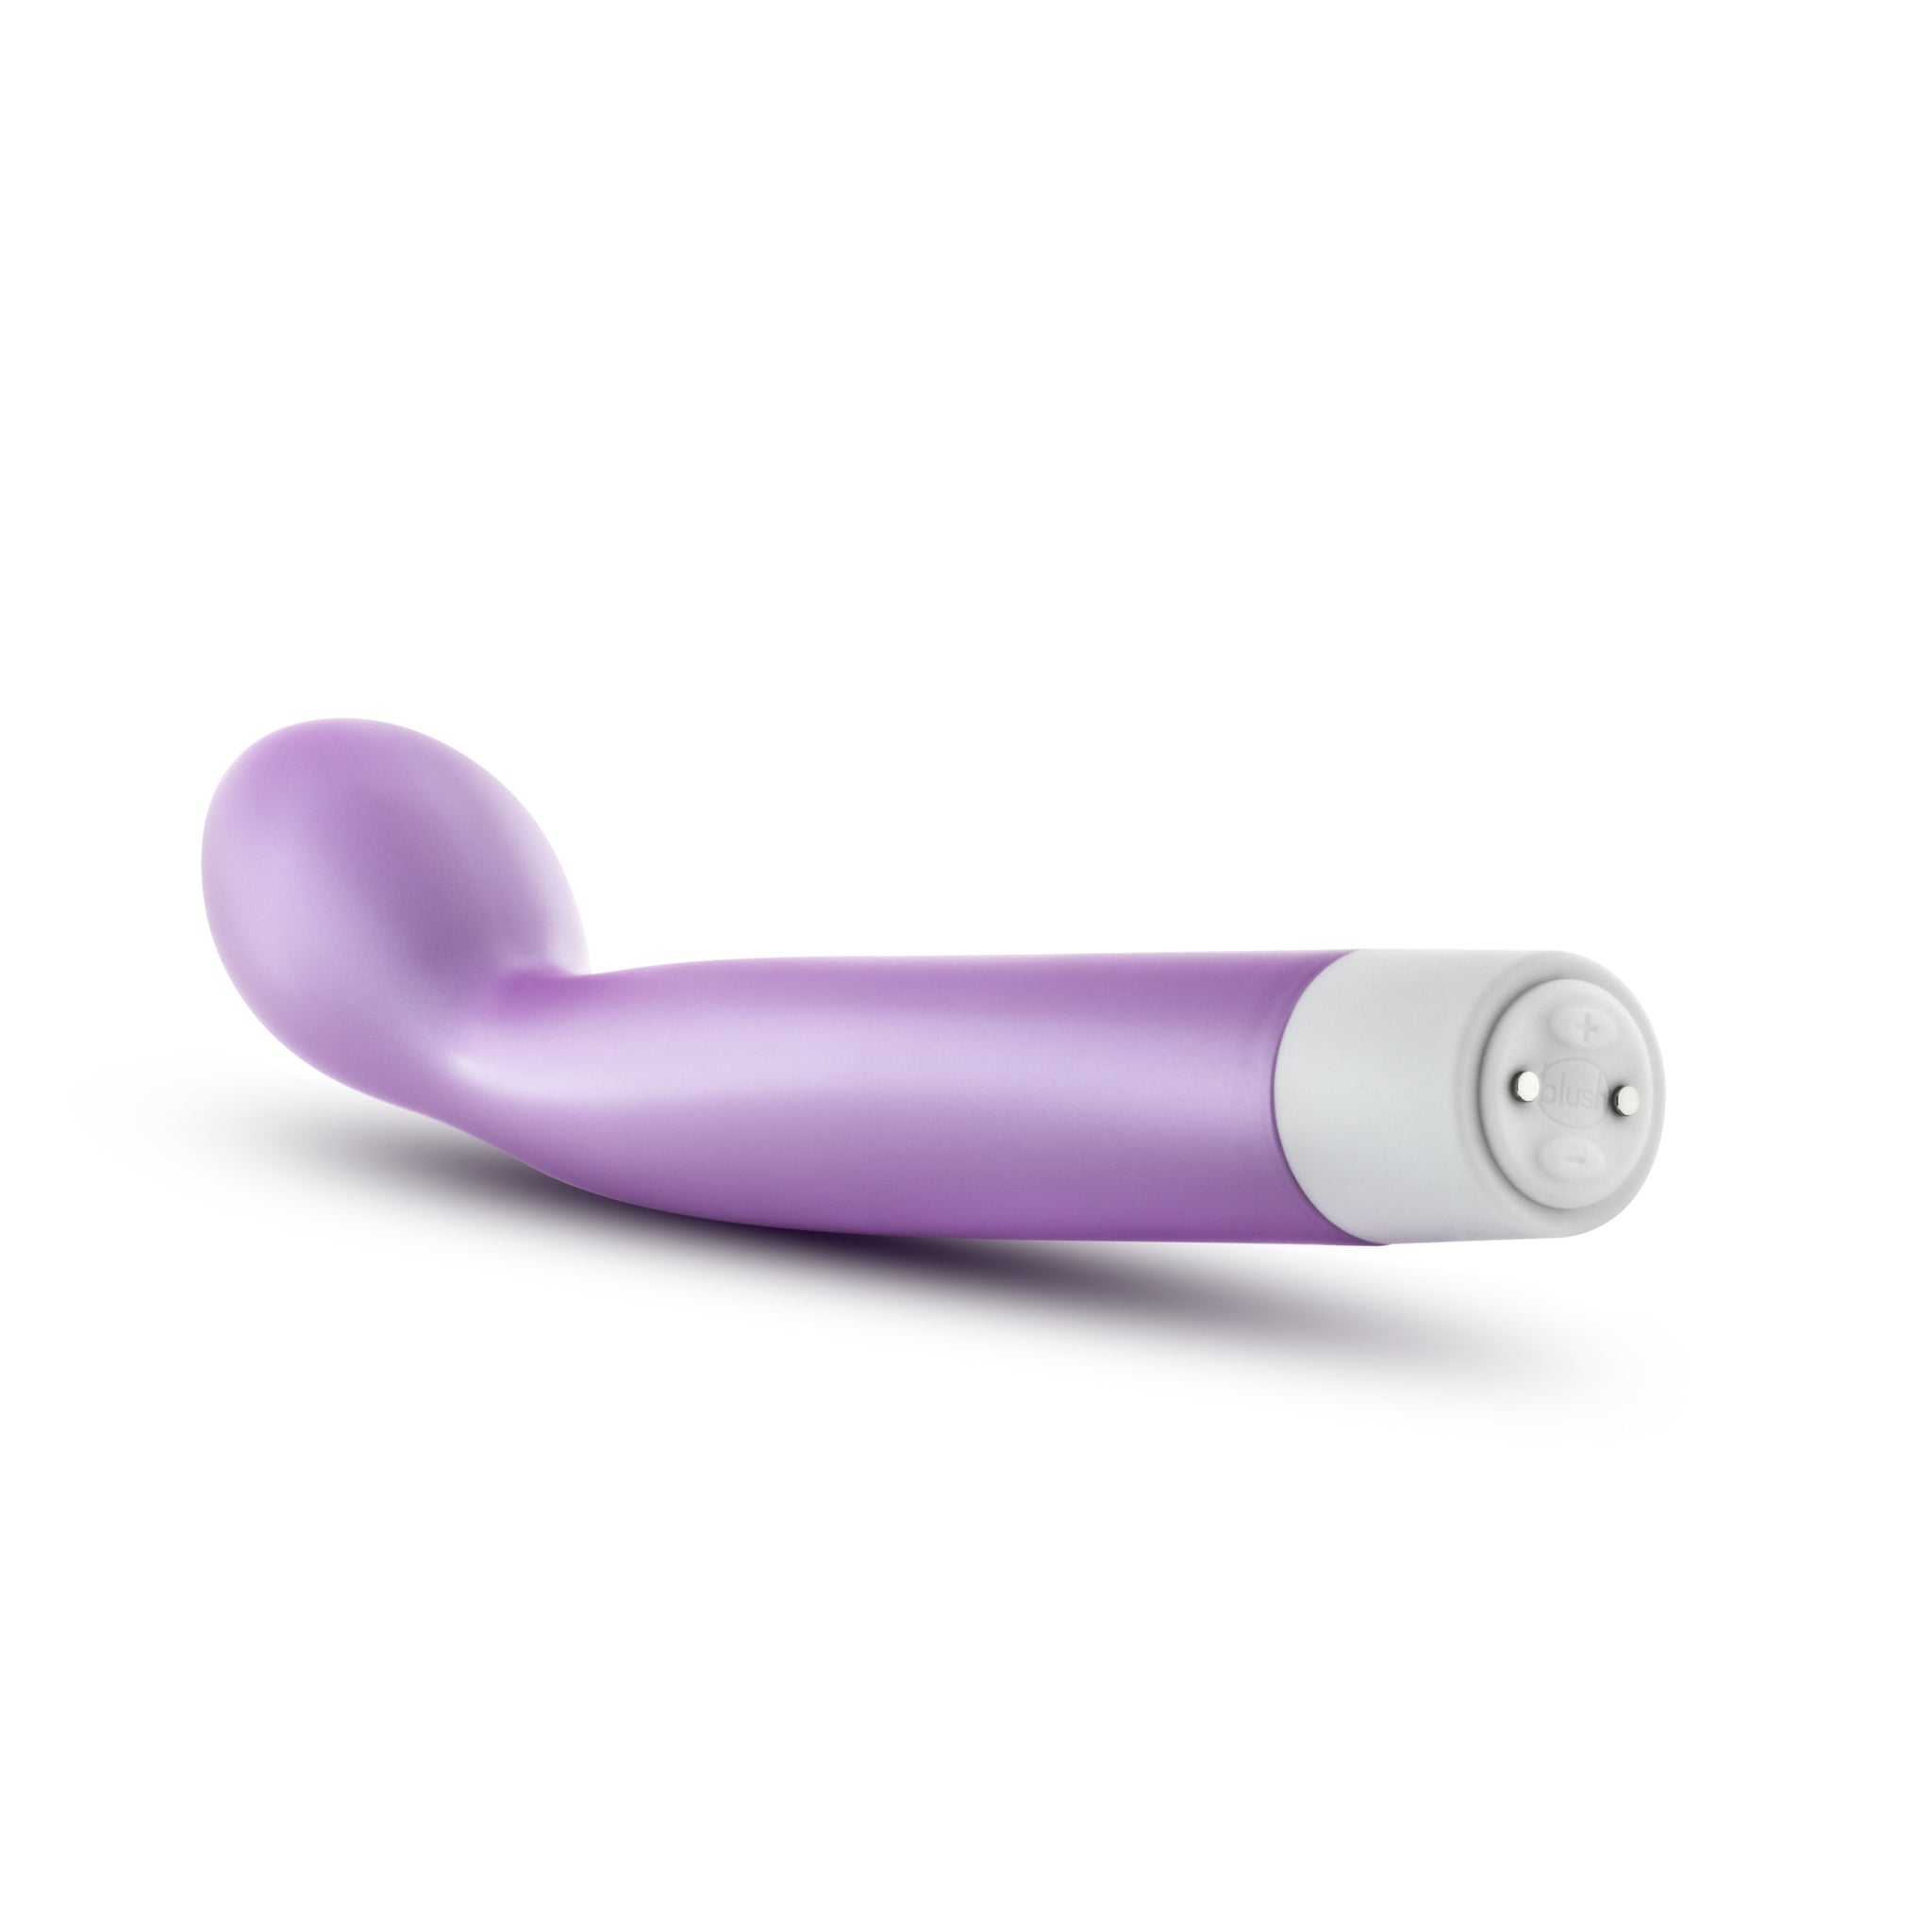 Noje G Slim Rechargeable Wisteria